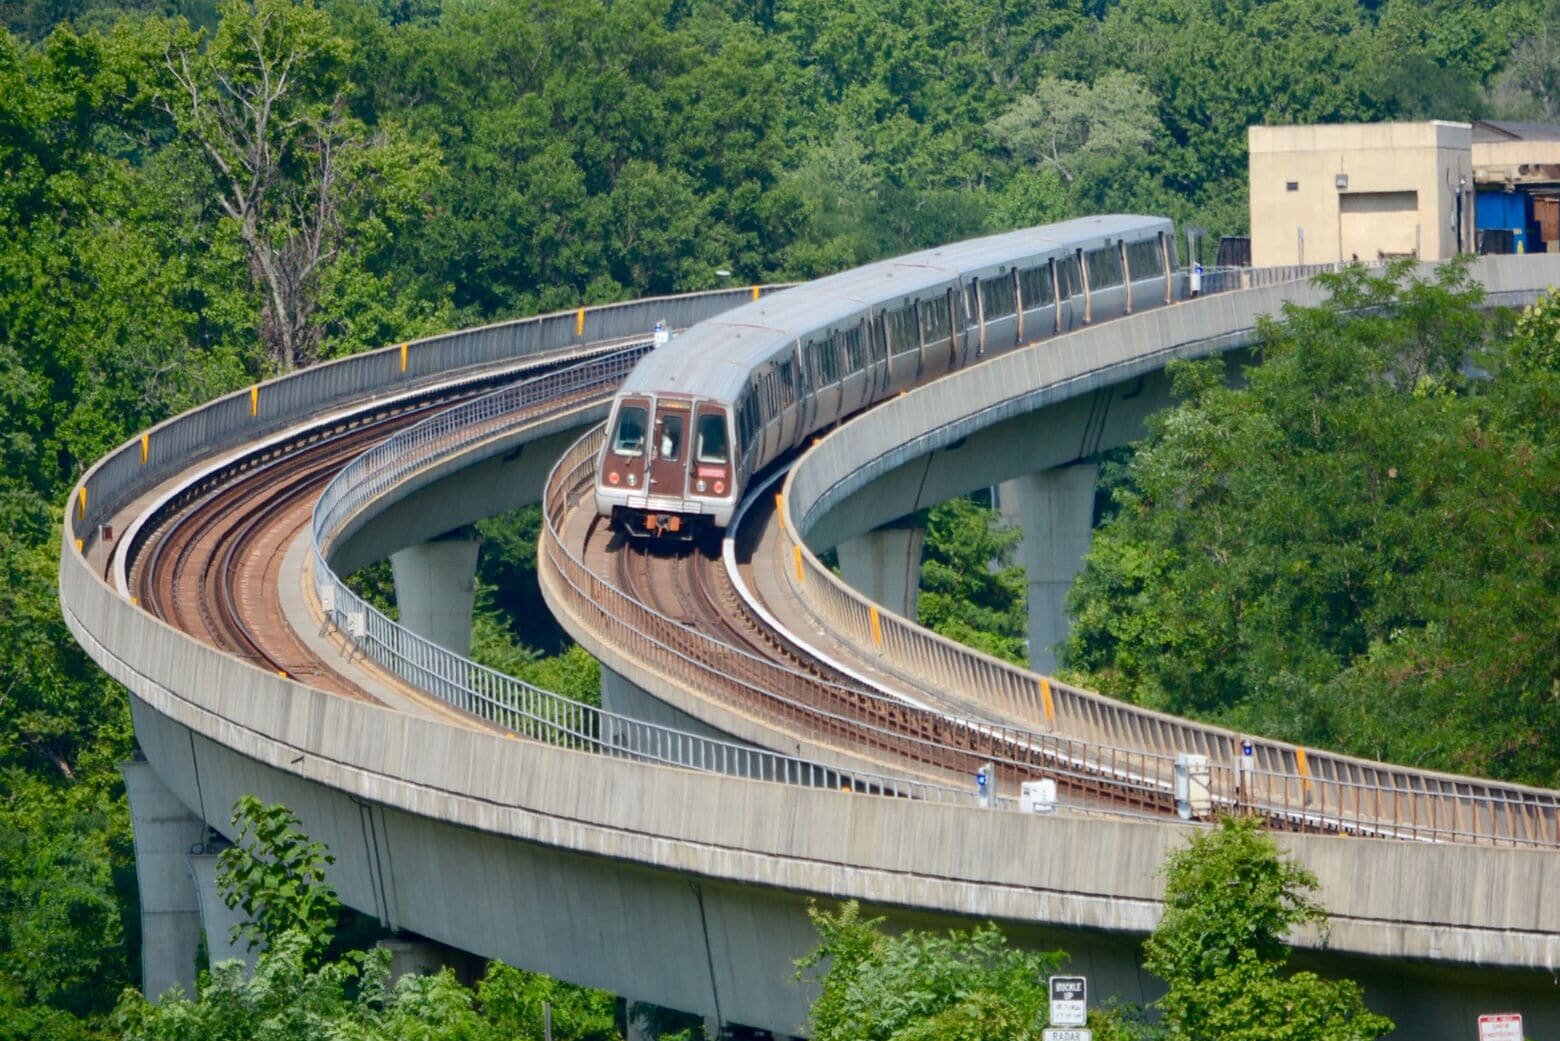 Photo shows a Metrorail train on the Green Line